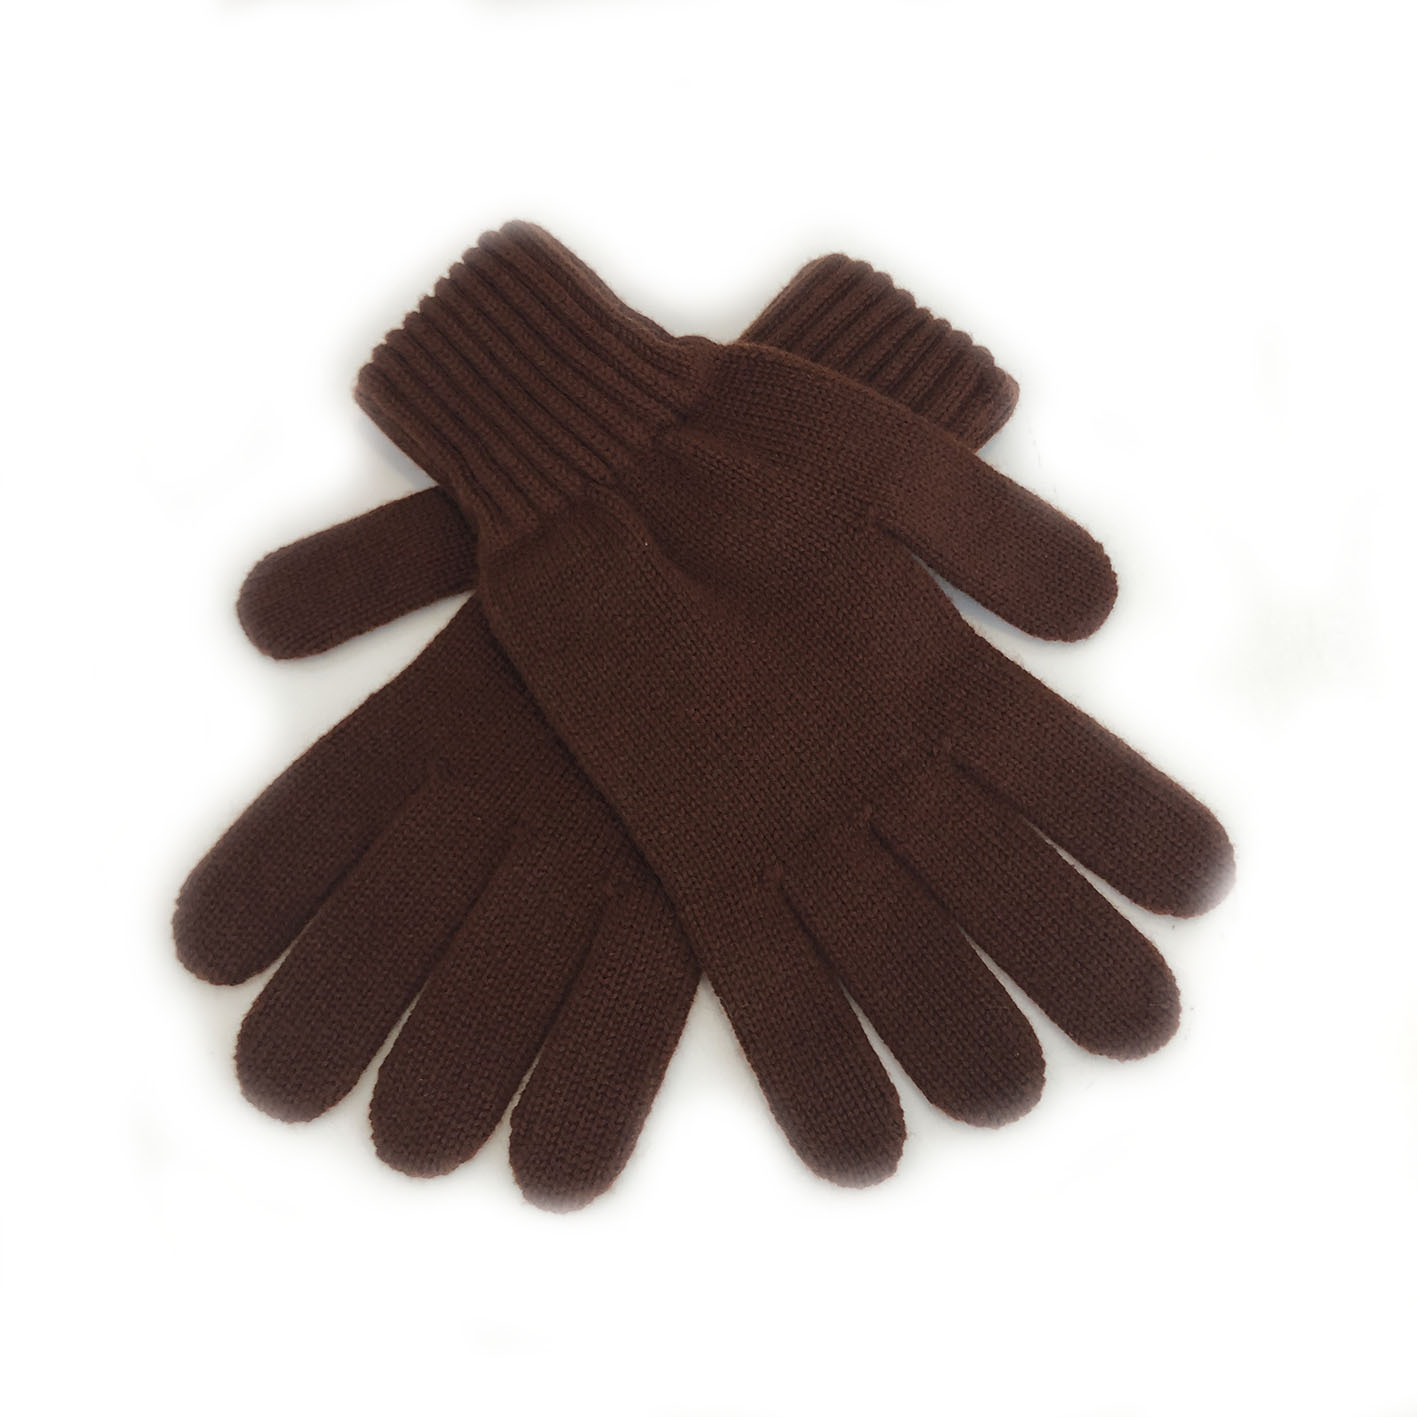 An image of Mens 100% Cashmere Gloves - Pheasant Brown